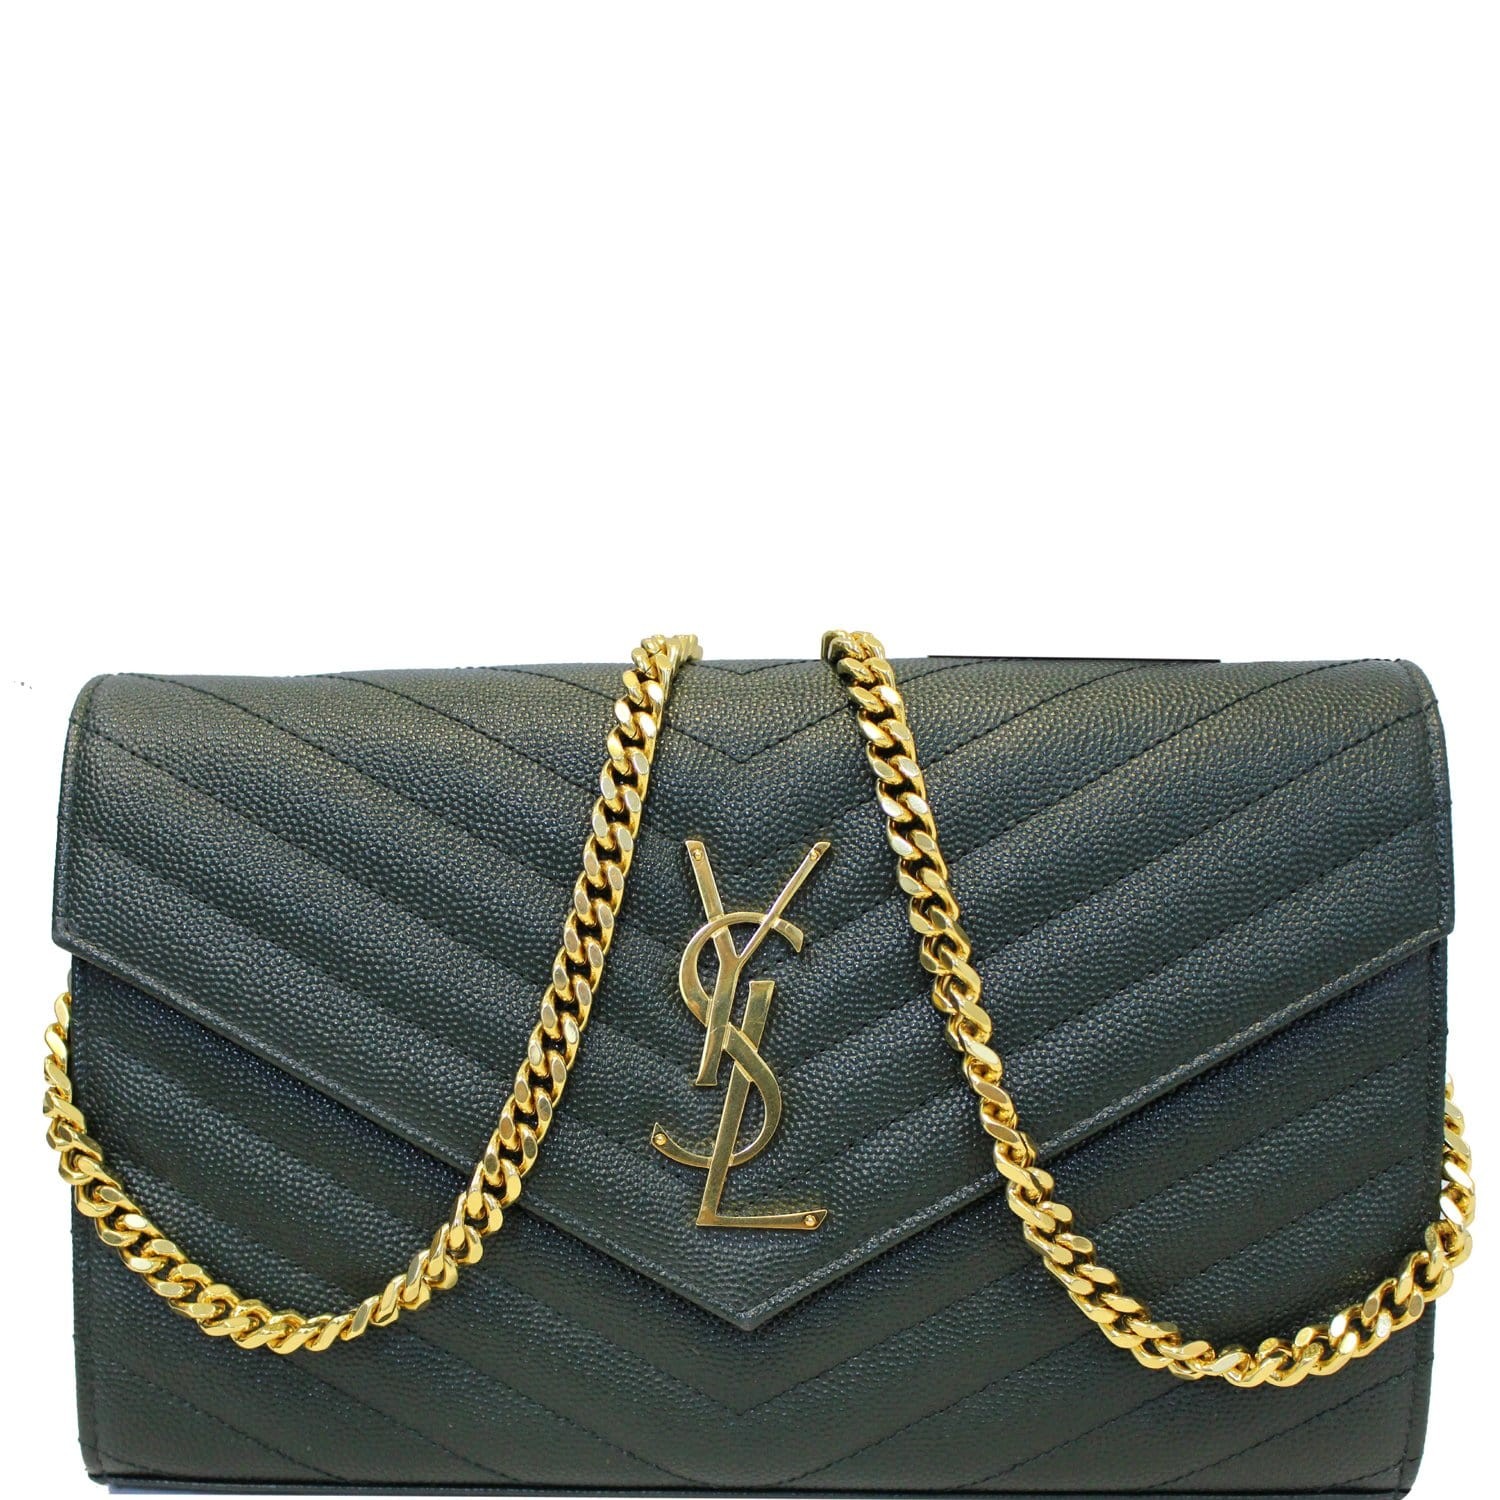 YSL uptown Mini Envelope Croc Embossed Leather bag with box